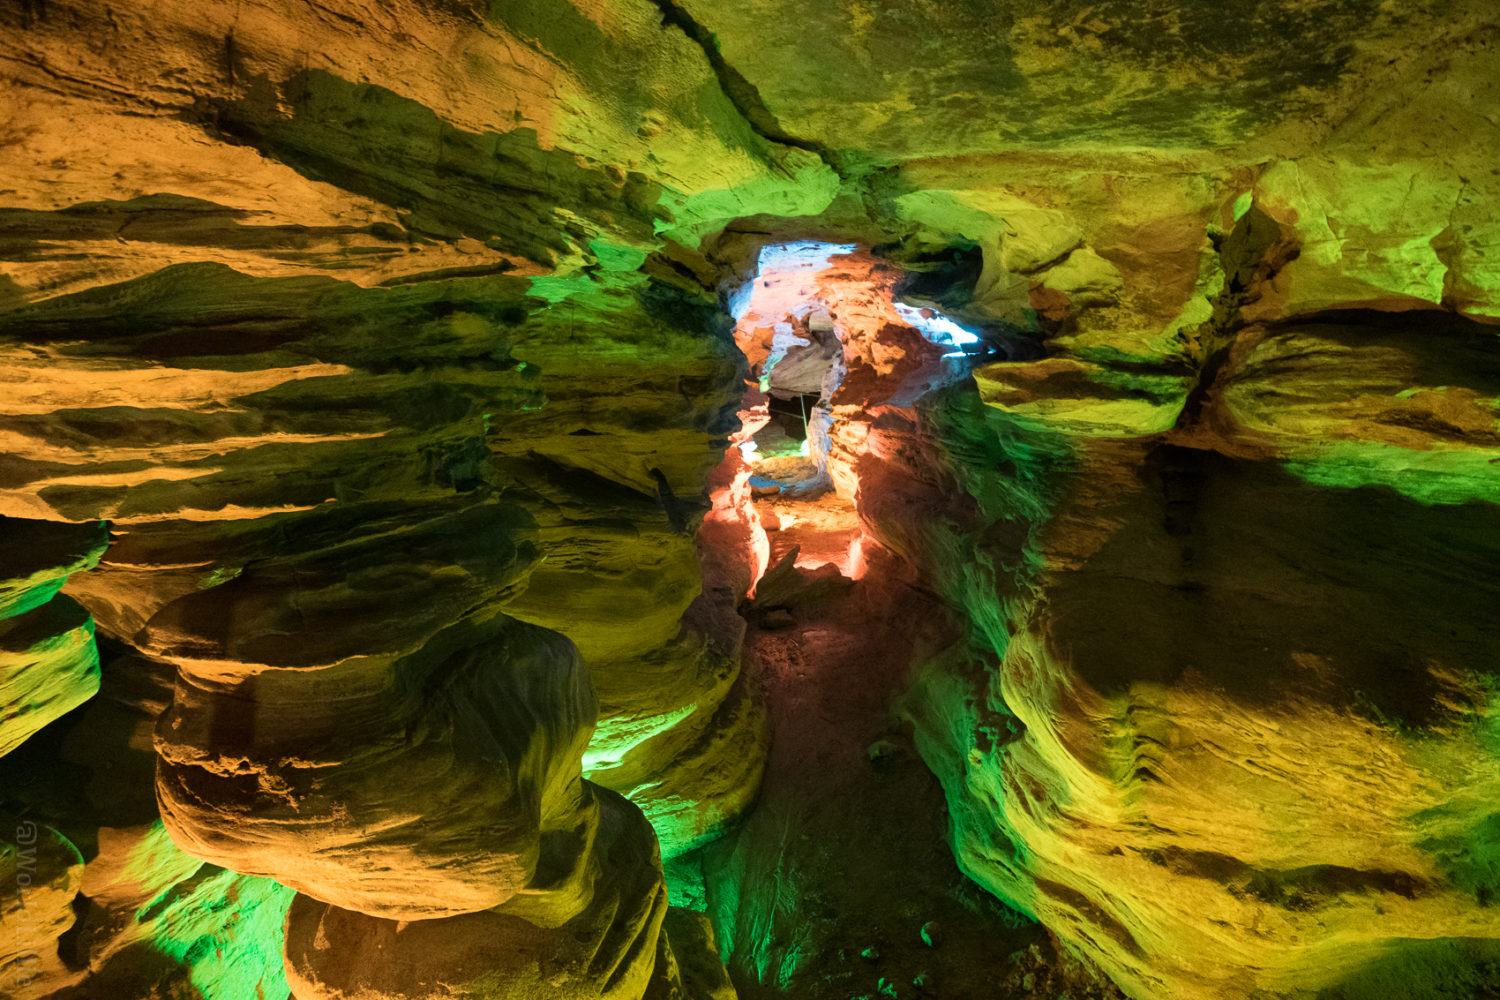 This section of the caverns is lit in green.